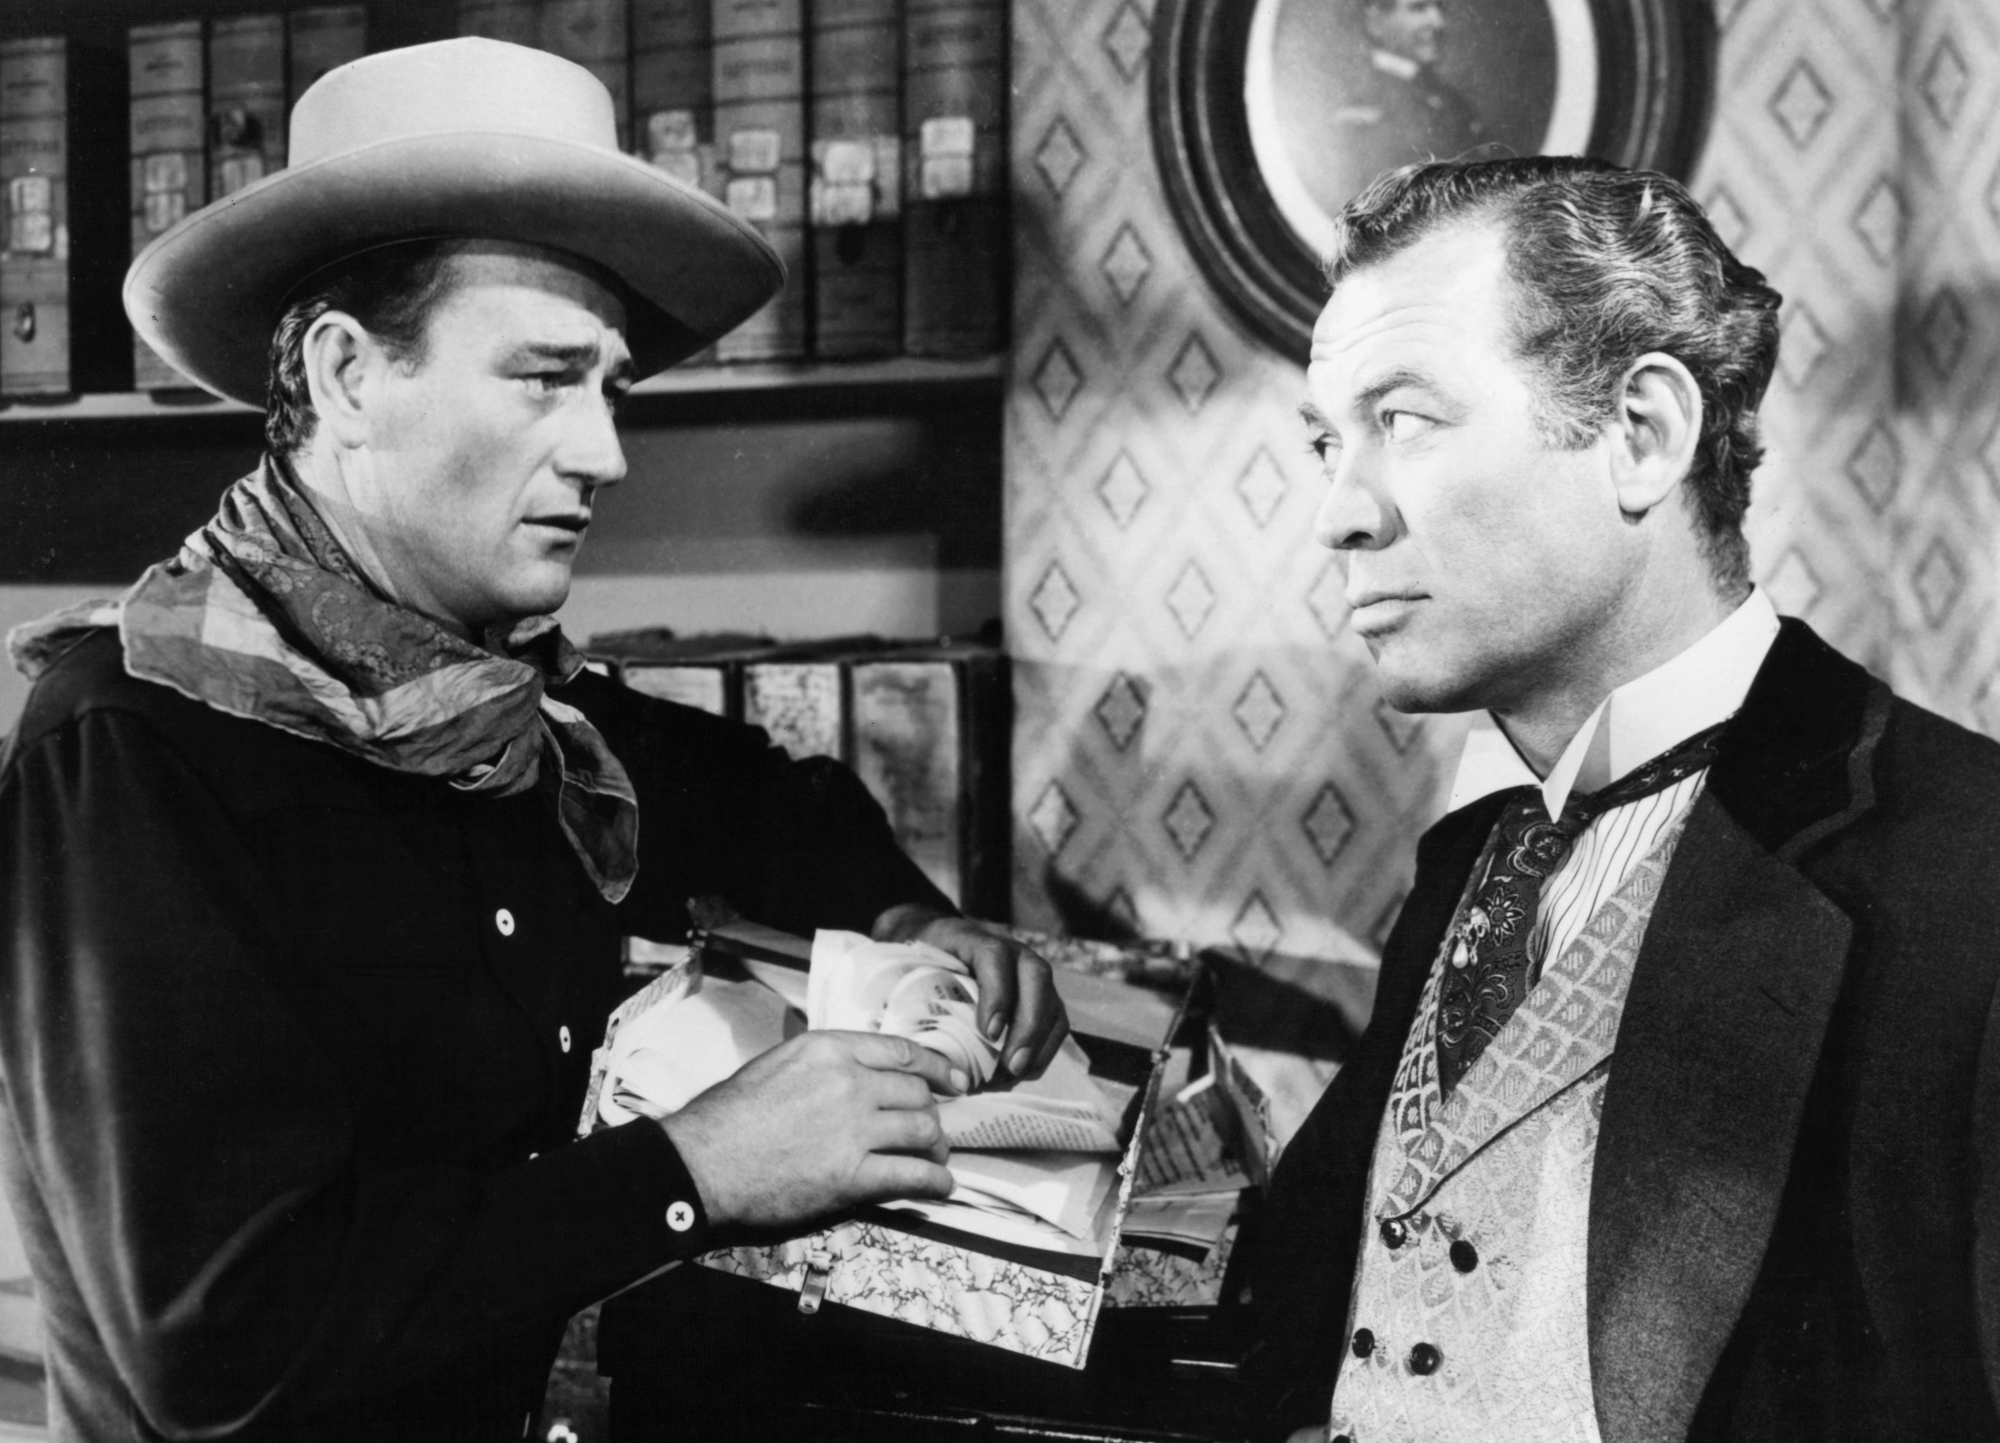 John Wayne Once Lit Ward Bond’s Chest on Fire, Got Banned From Drinking While Filming ‘The Fighting Seabees’